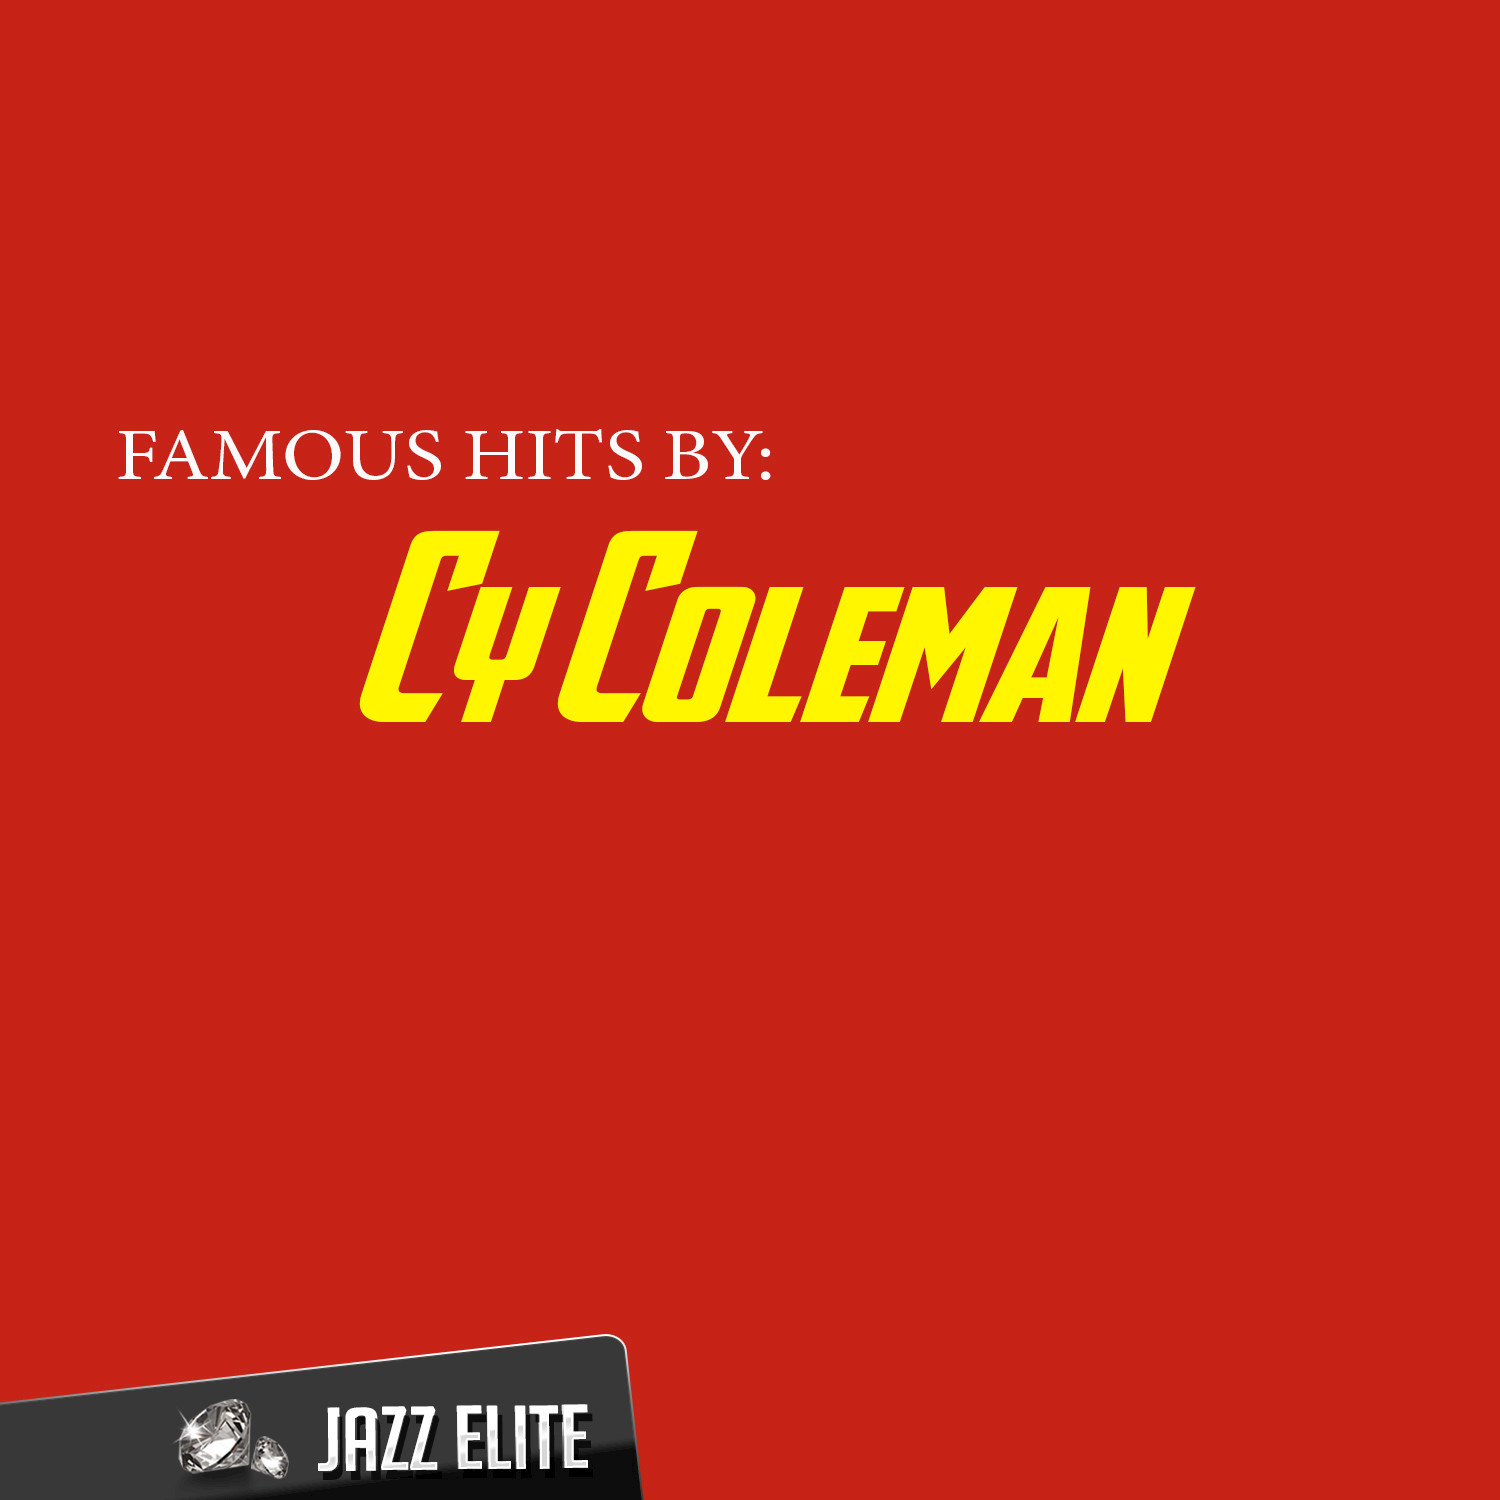 Famous Hits by Cy Coleman